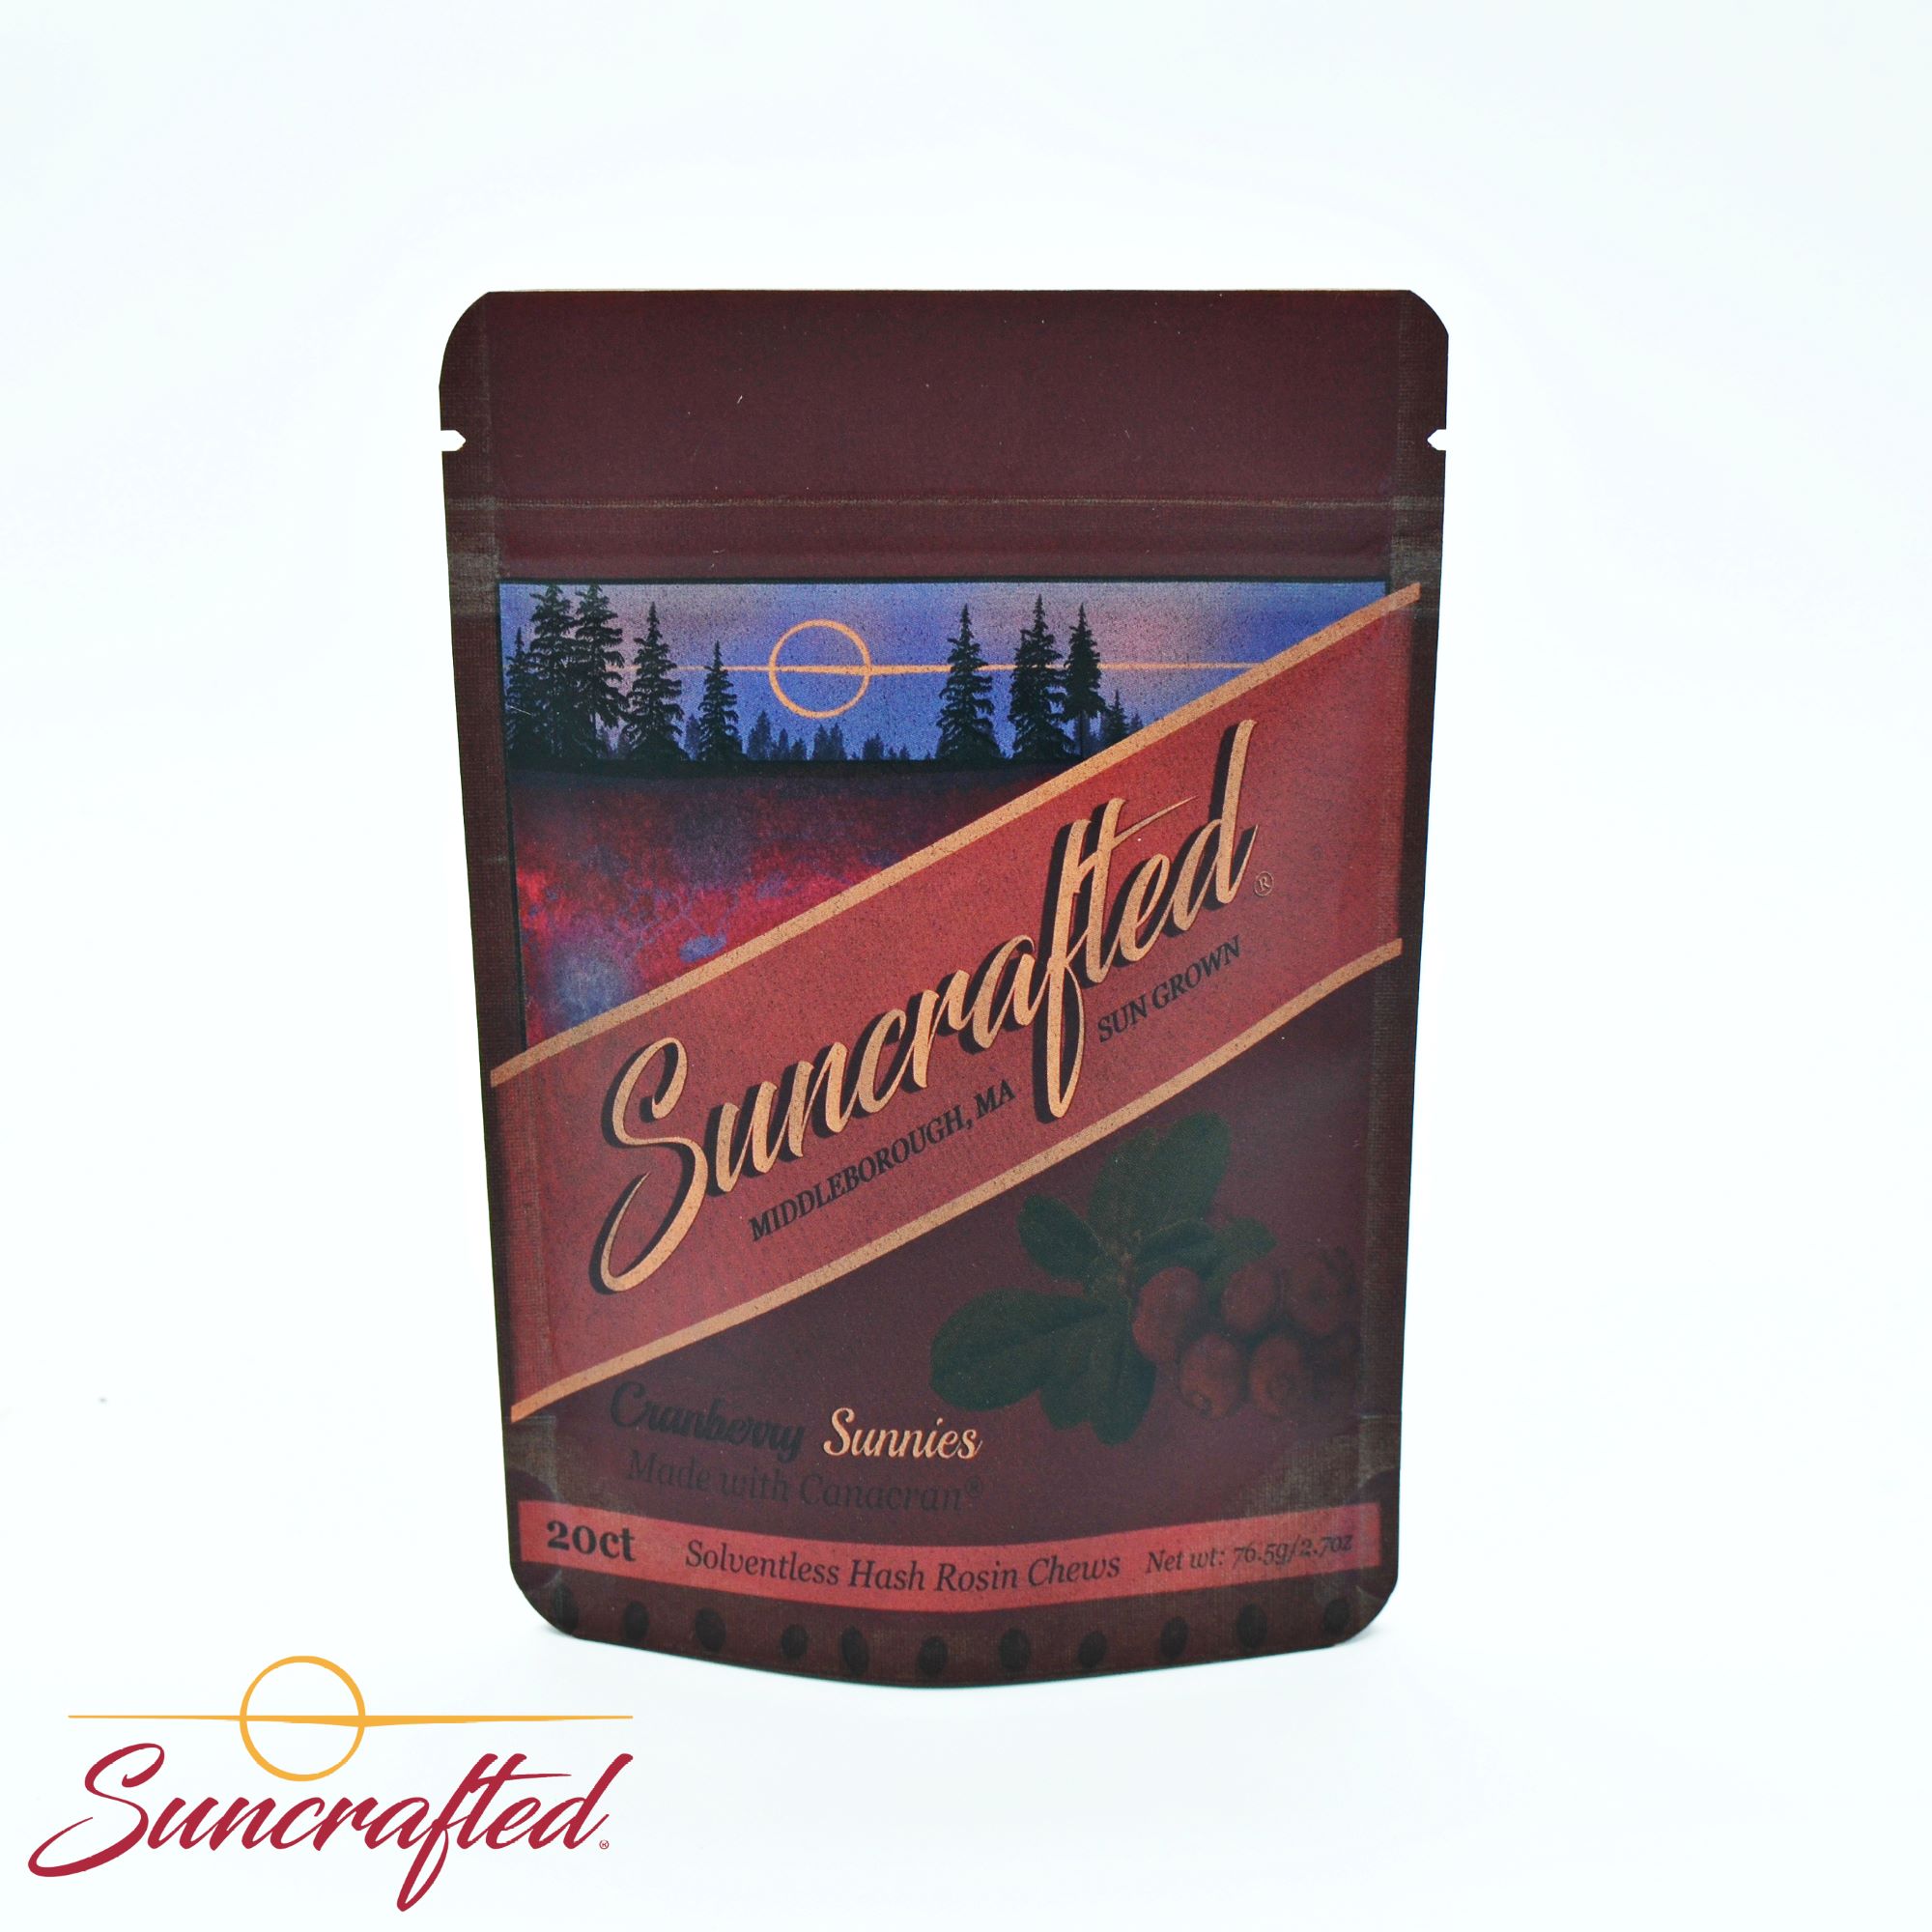 Suncrafted Cannabis Dispensary